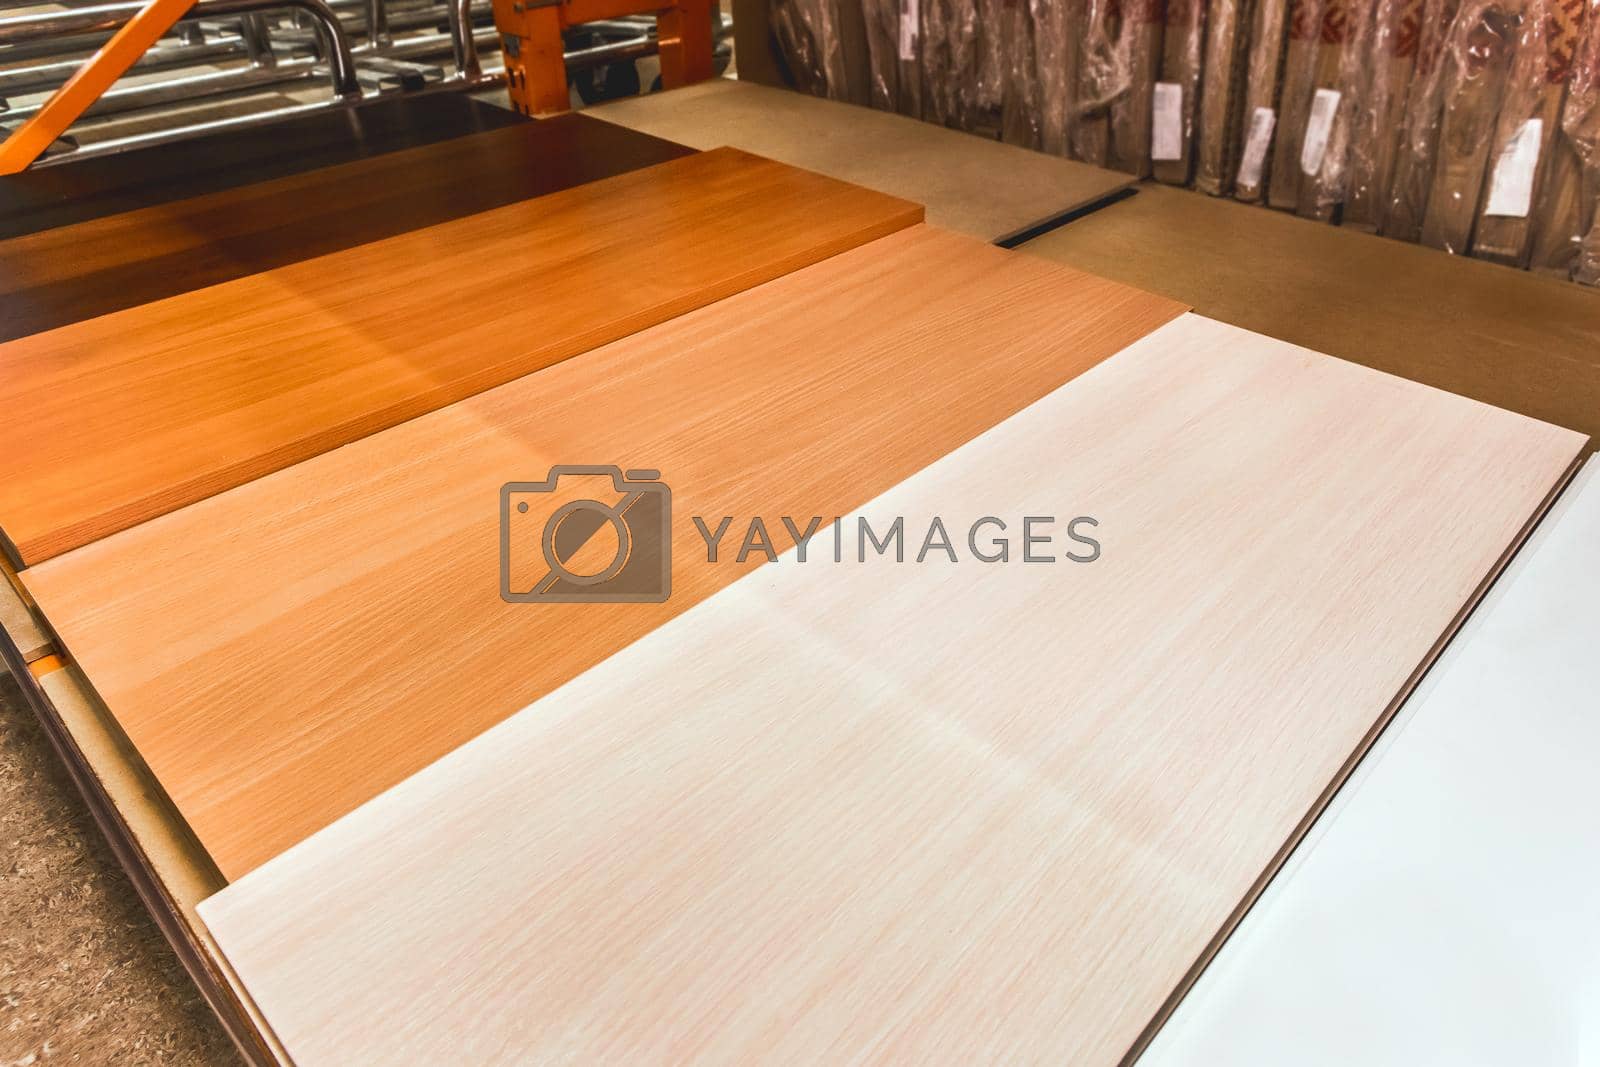 Royalty free image of Particleboard, pressed wood boards, building materials in a hardware store by AYDO8